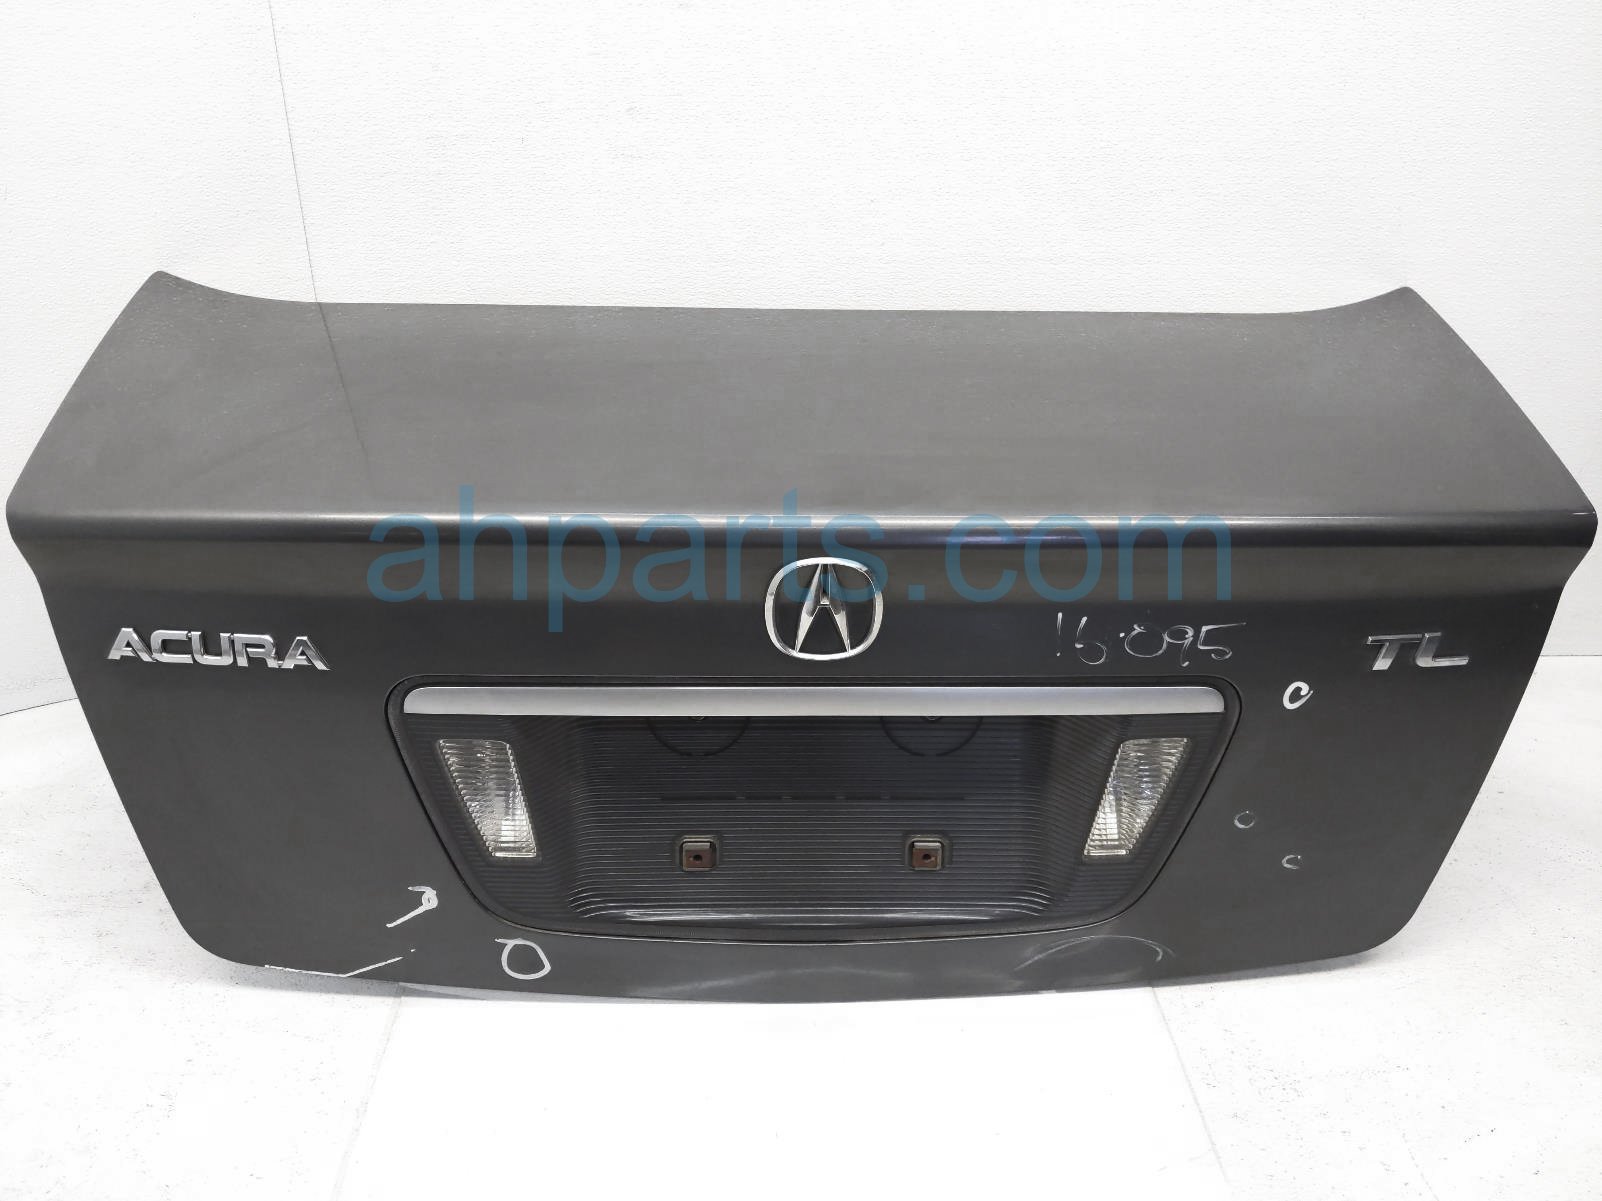 $200 Acura TRUNK / DECK LID - GRAY - NOTES